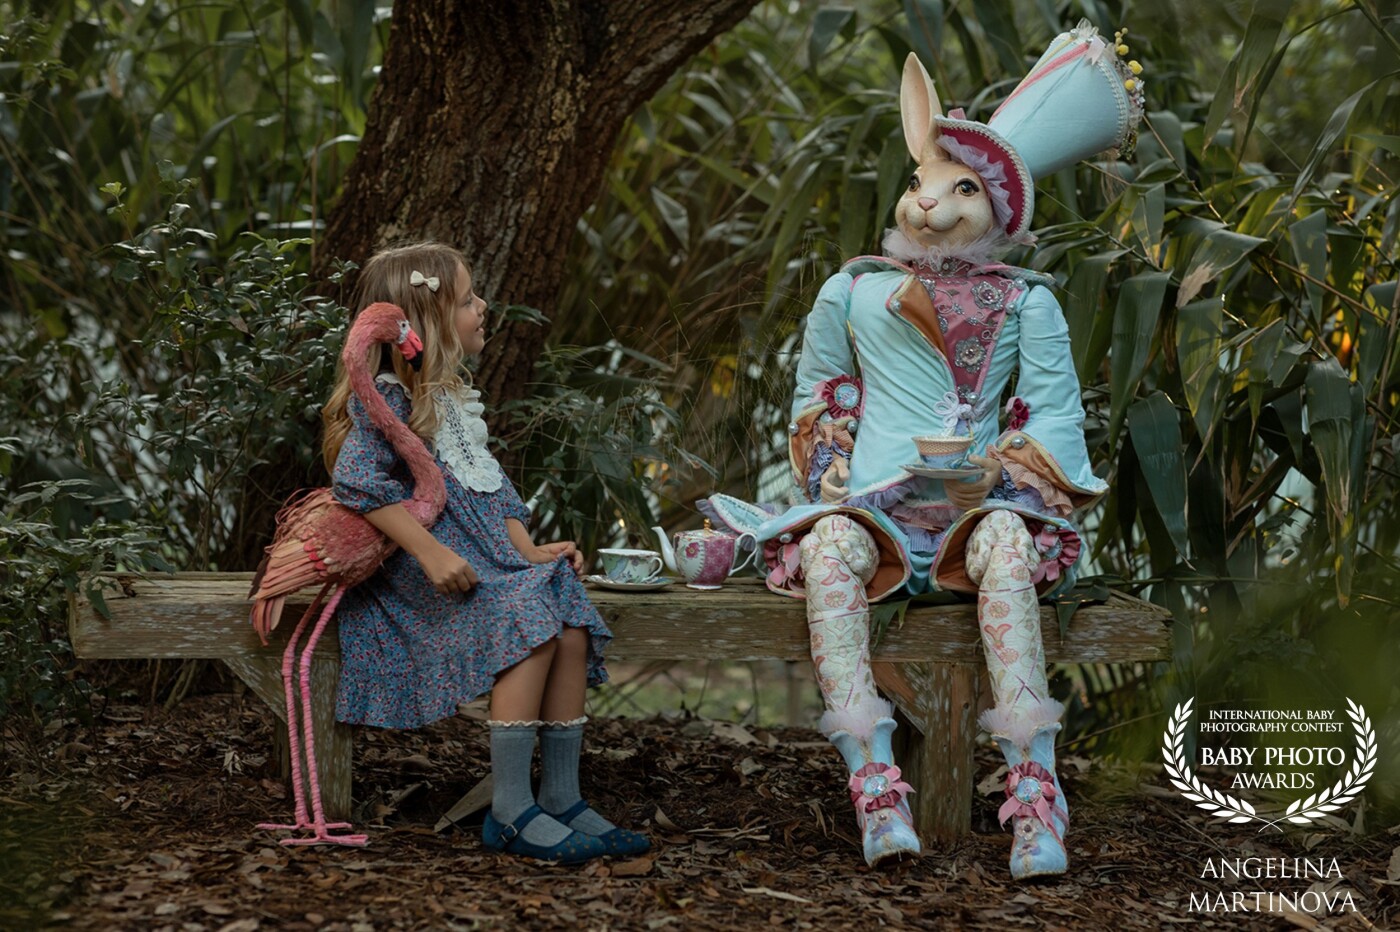 Curiosity led Alice to follow the white rabbit into wonderland. She chased him and finally found him, as Alice was on a quest to find knowledge.